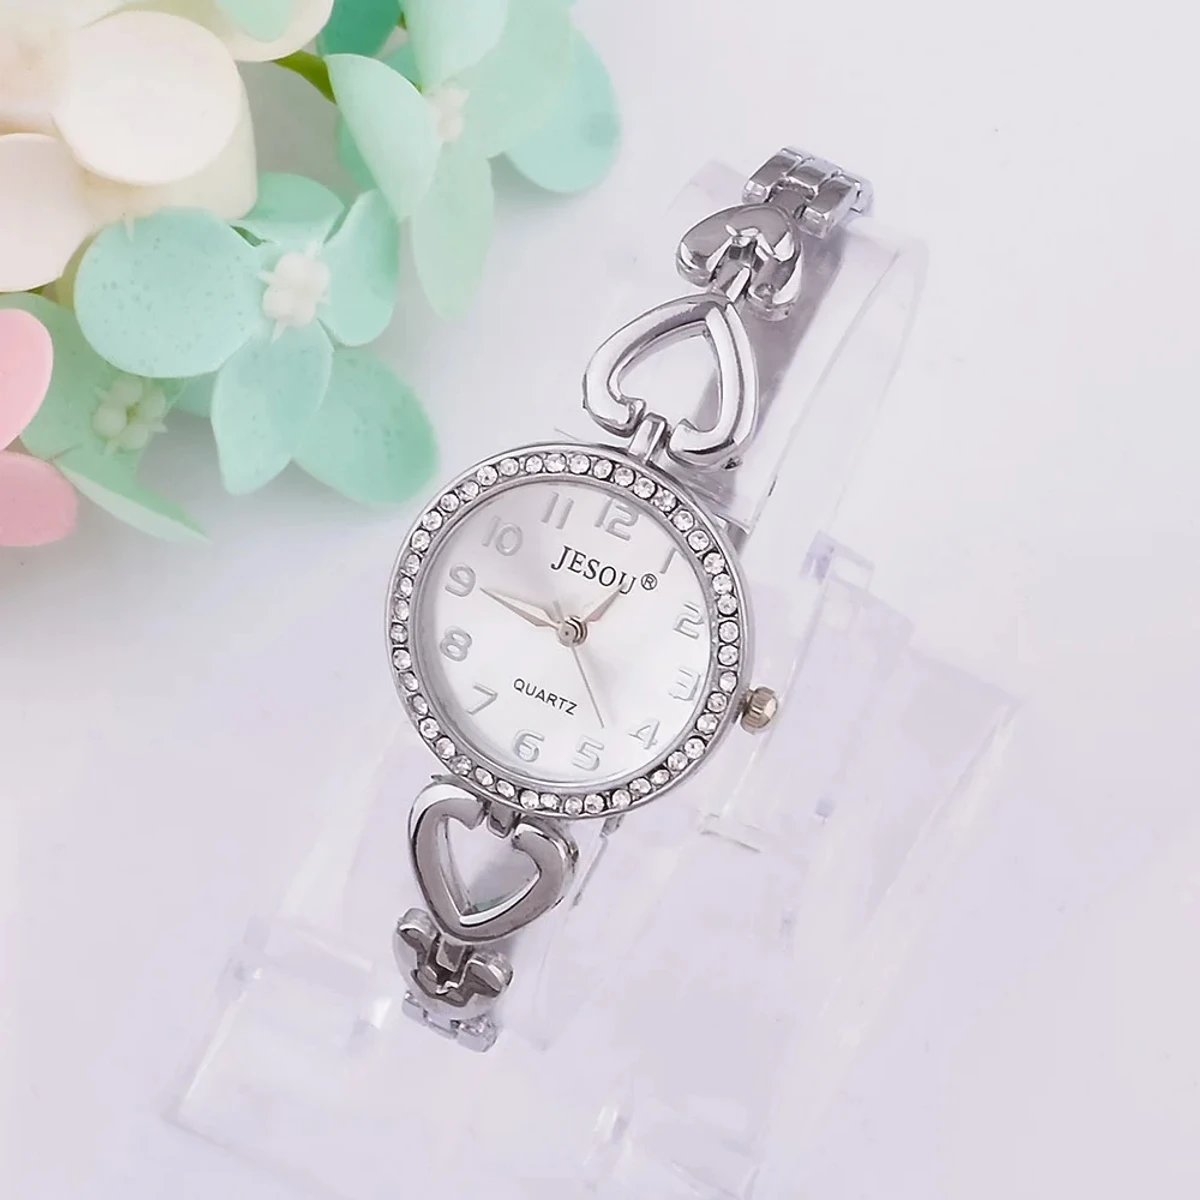 4 in 1 Female Jewelry Set Quartz Watch Crystal Design Necklace Earrings ring For Lady's Wife Mom Gift Box